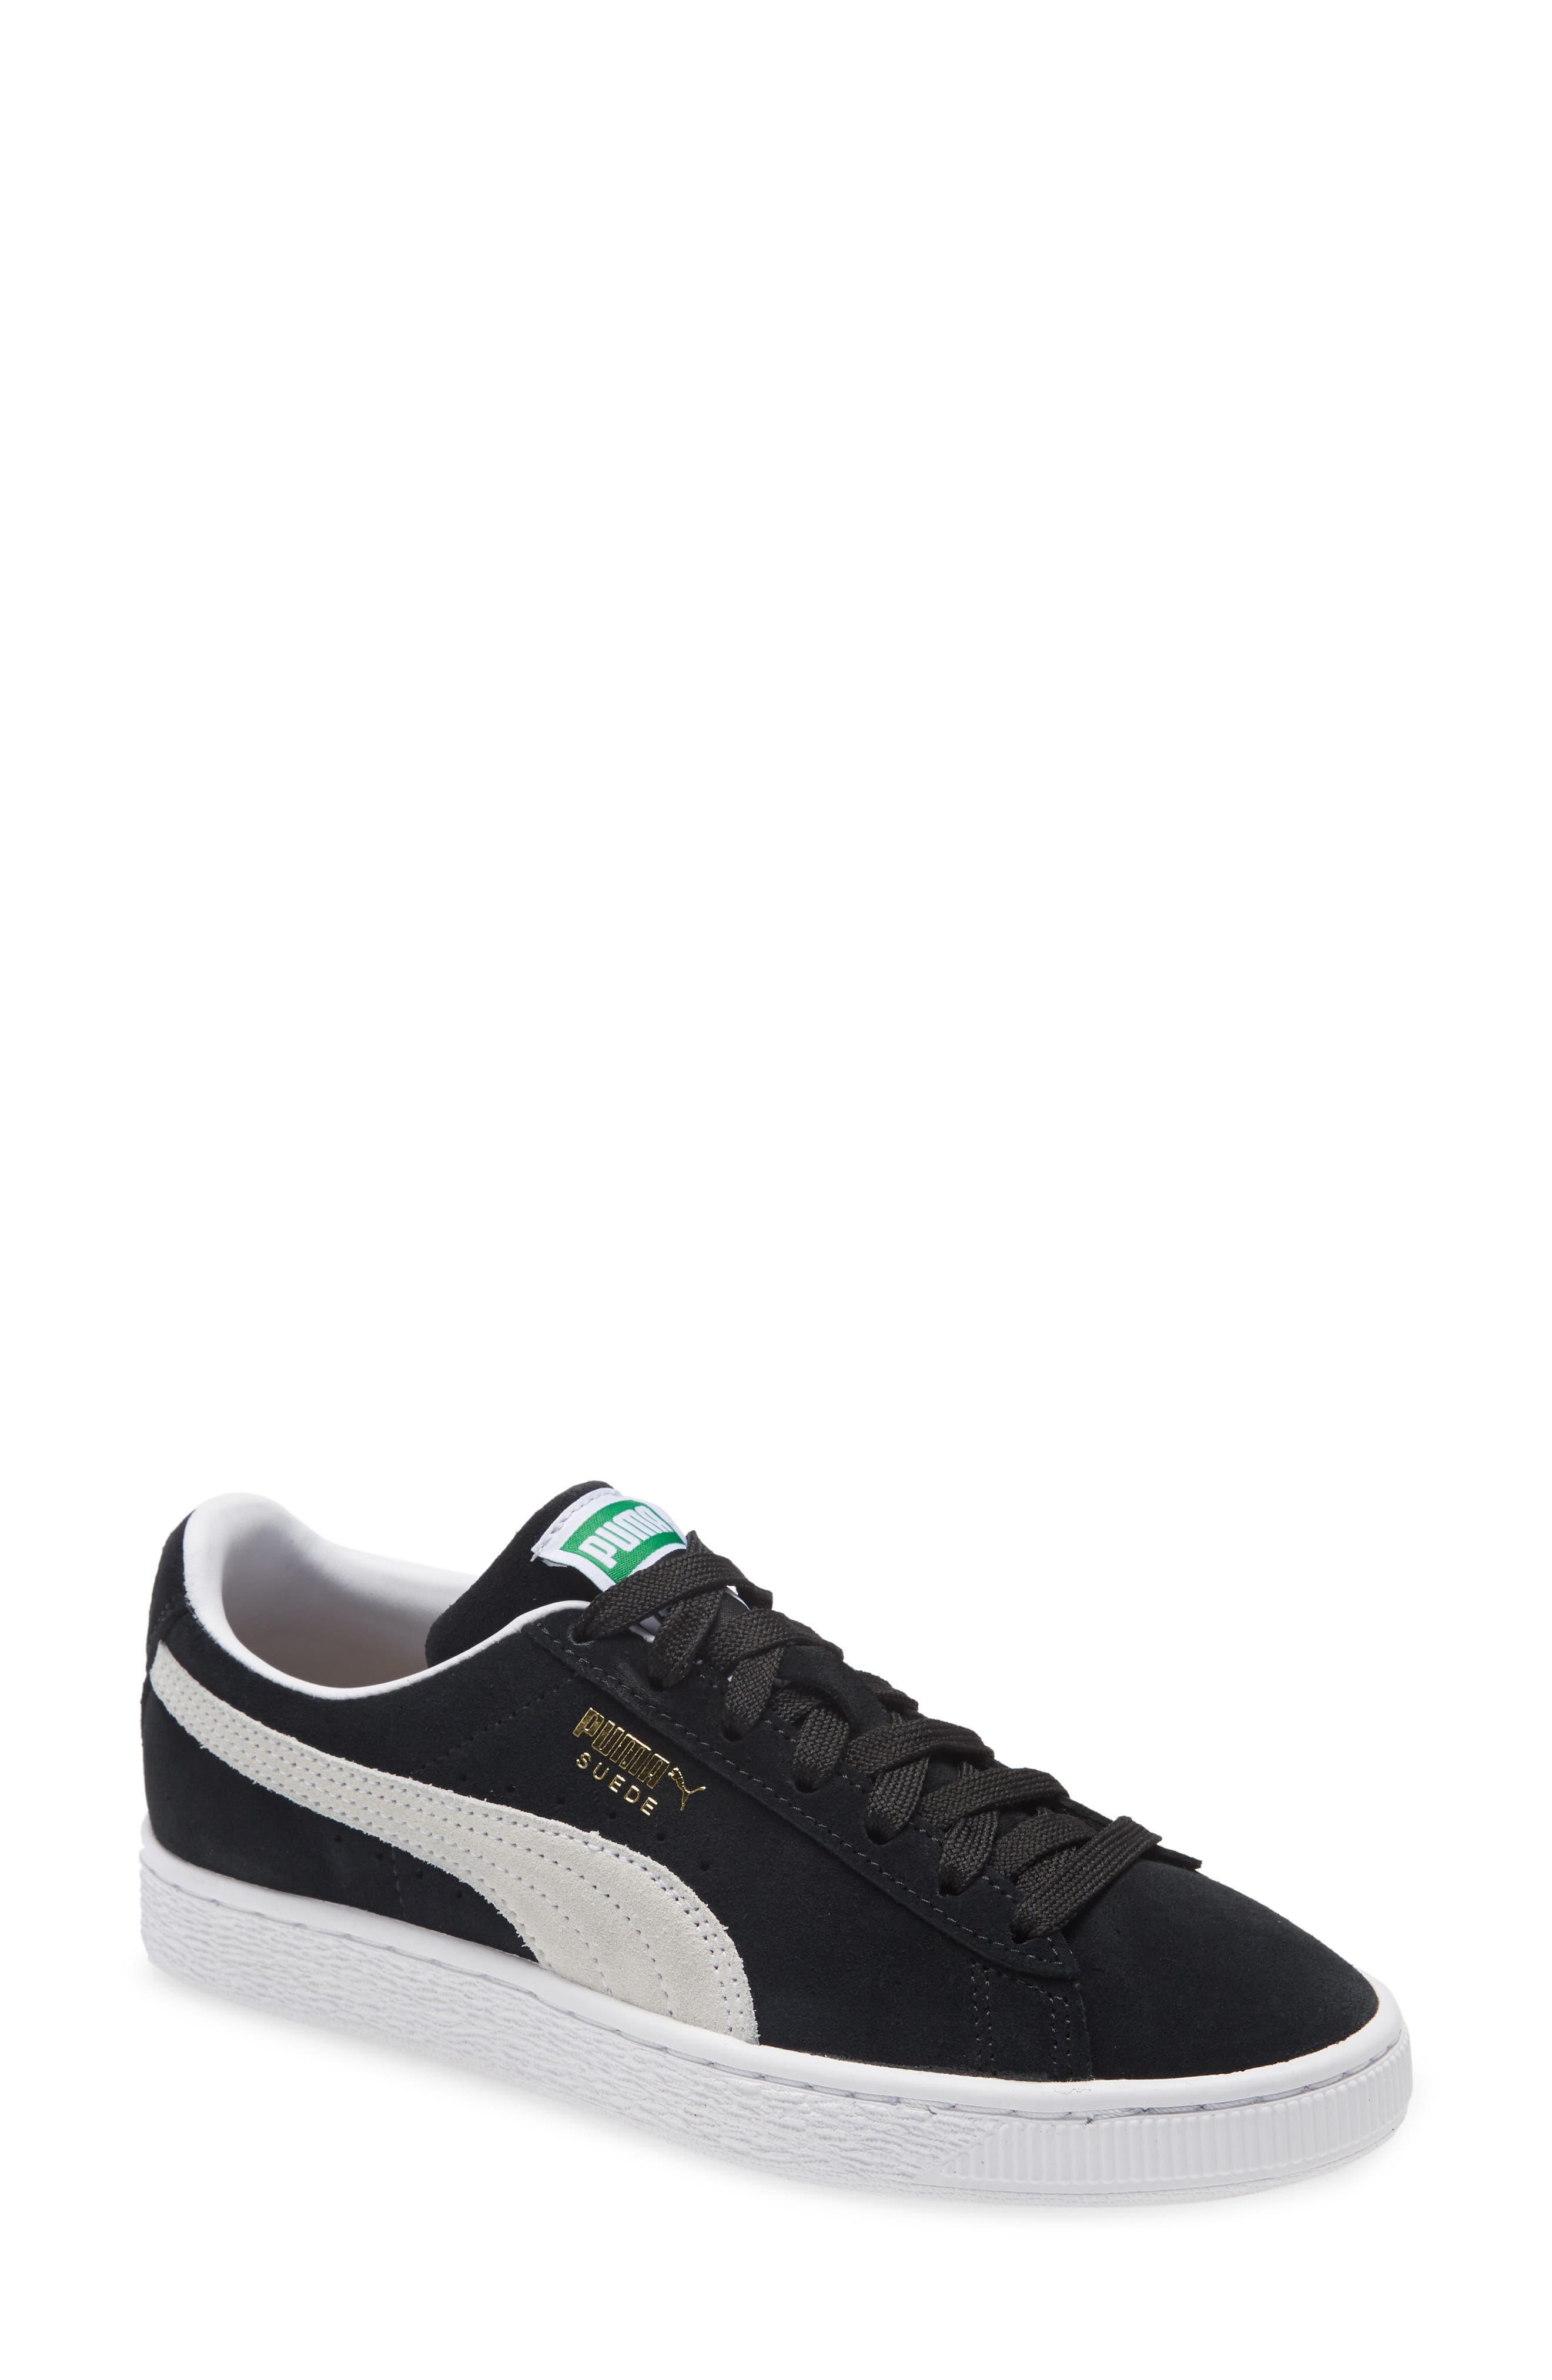 Puma Womens Suede Classic - Shoes Black/White Size 06.5